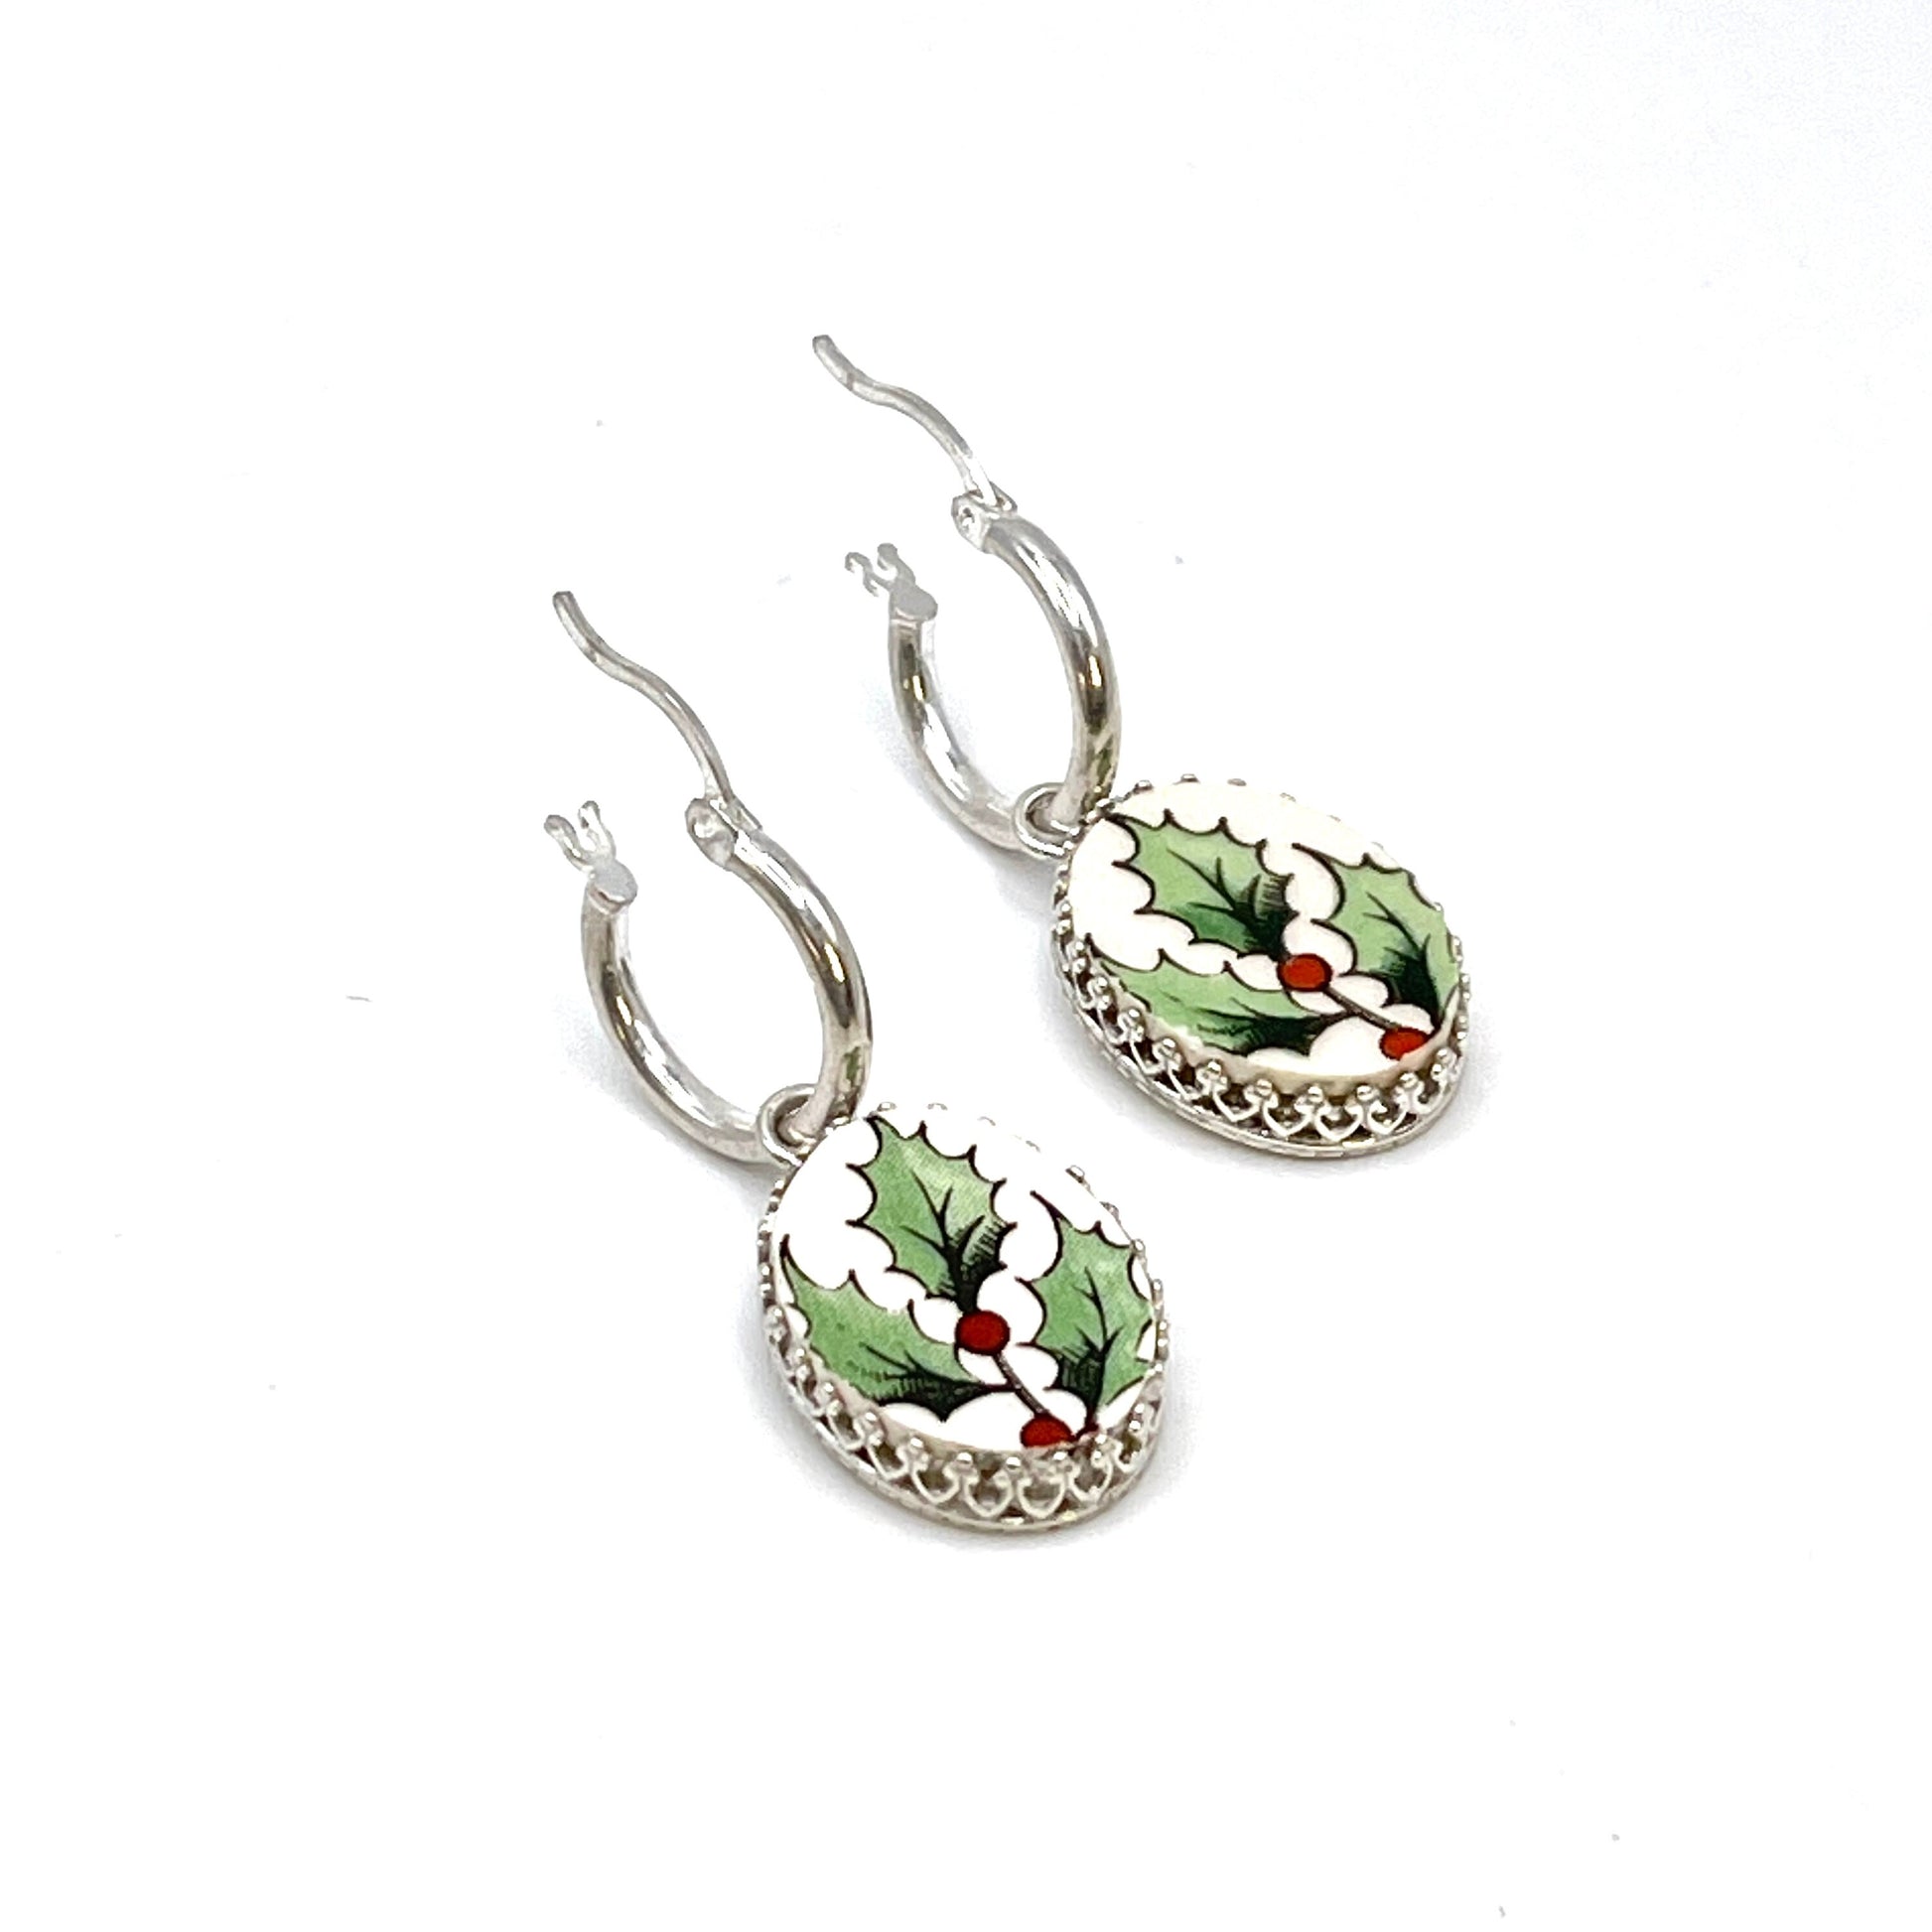 Spode Christmas Tree China Dangle Earrings, Unique Christmas Gifts for Wife, Broken China Jewelry, Sterling Silver Hoops